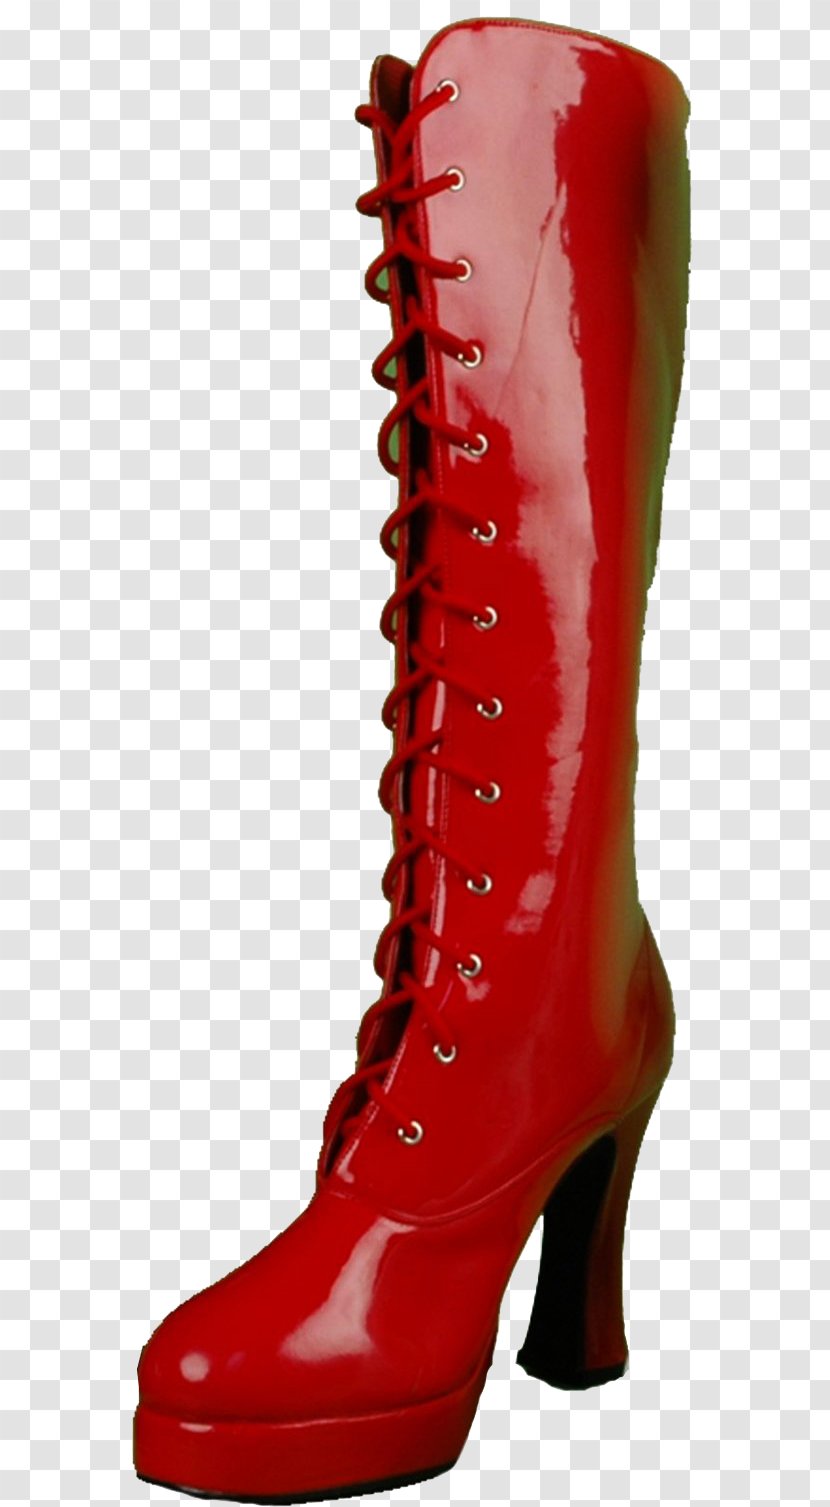 Riding Boot Shoe High-heeled Footwear - Red Boots Transparent PNG